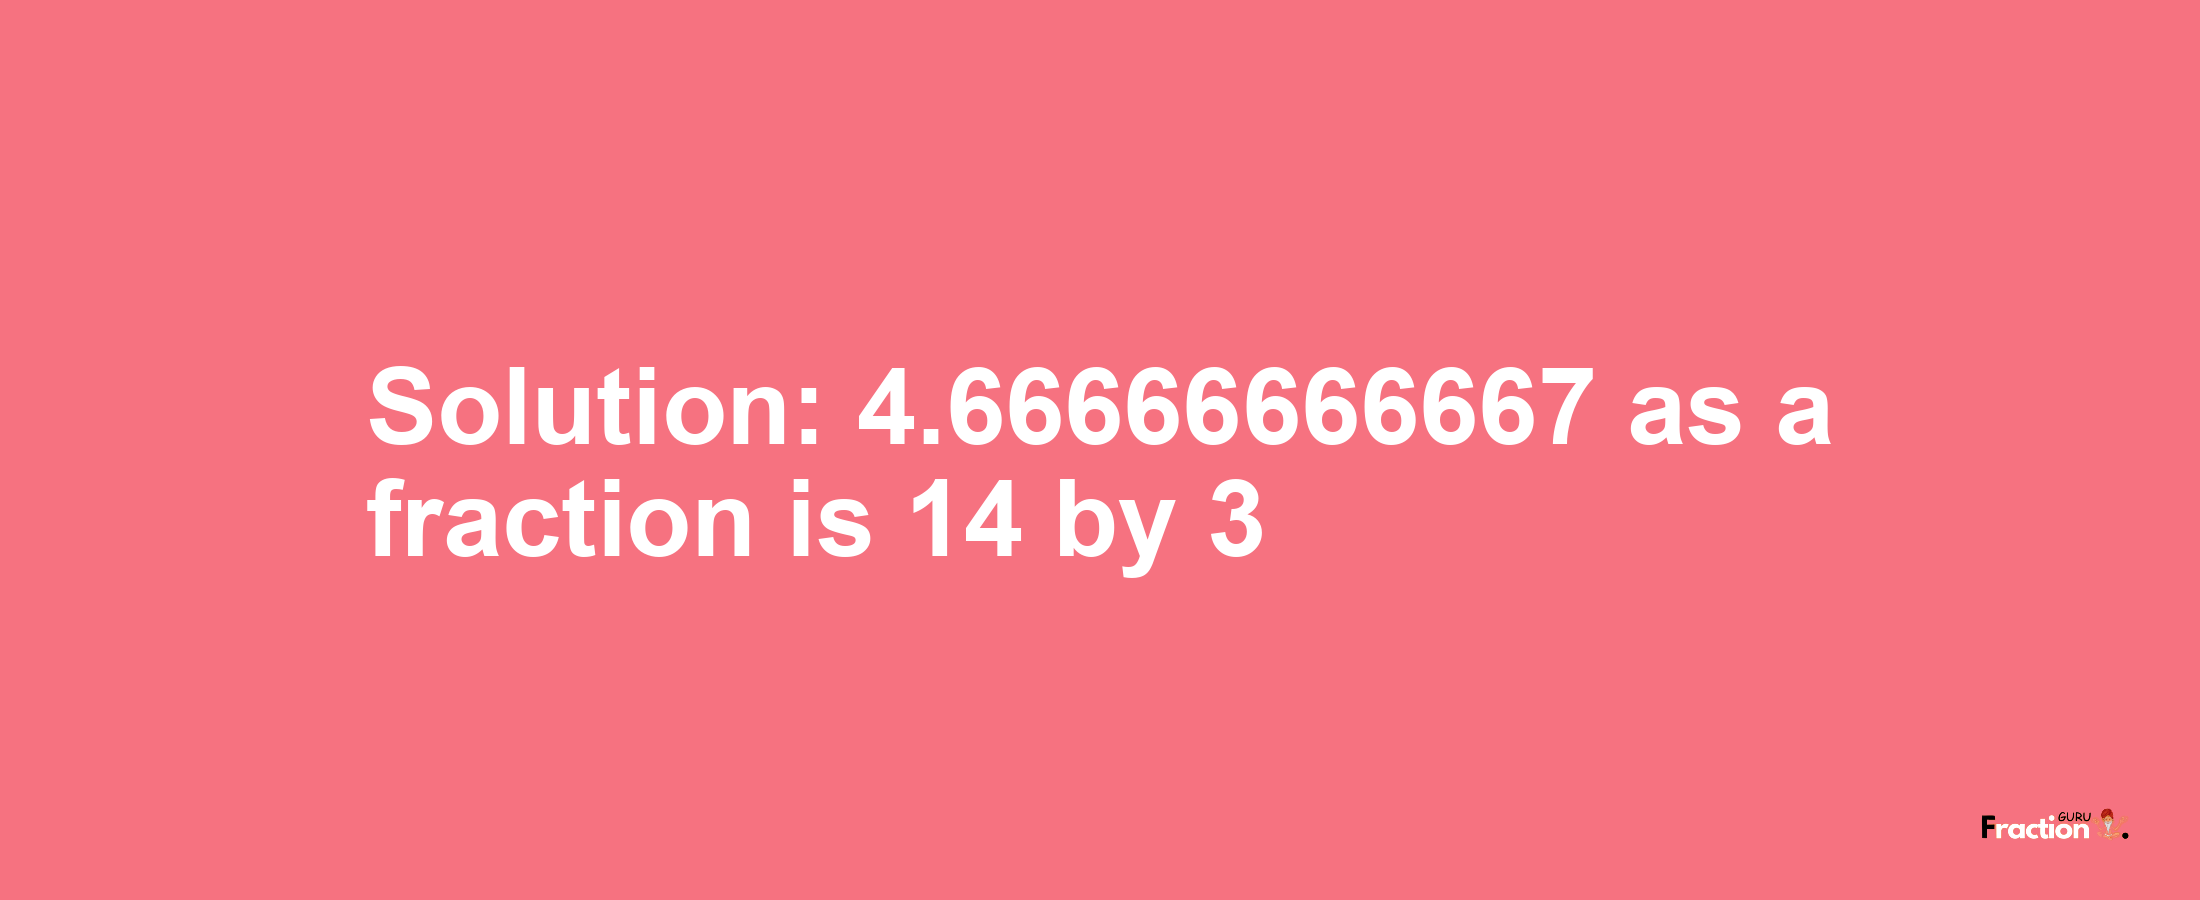 Solution:4.66666666667 as a fraction is 14/3